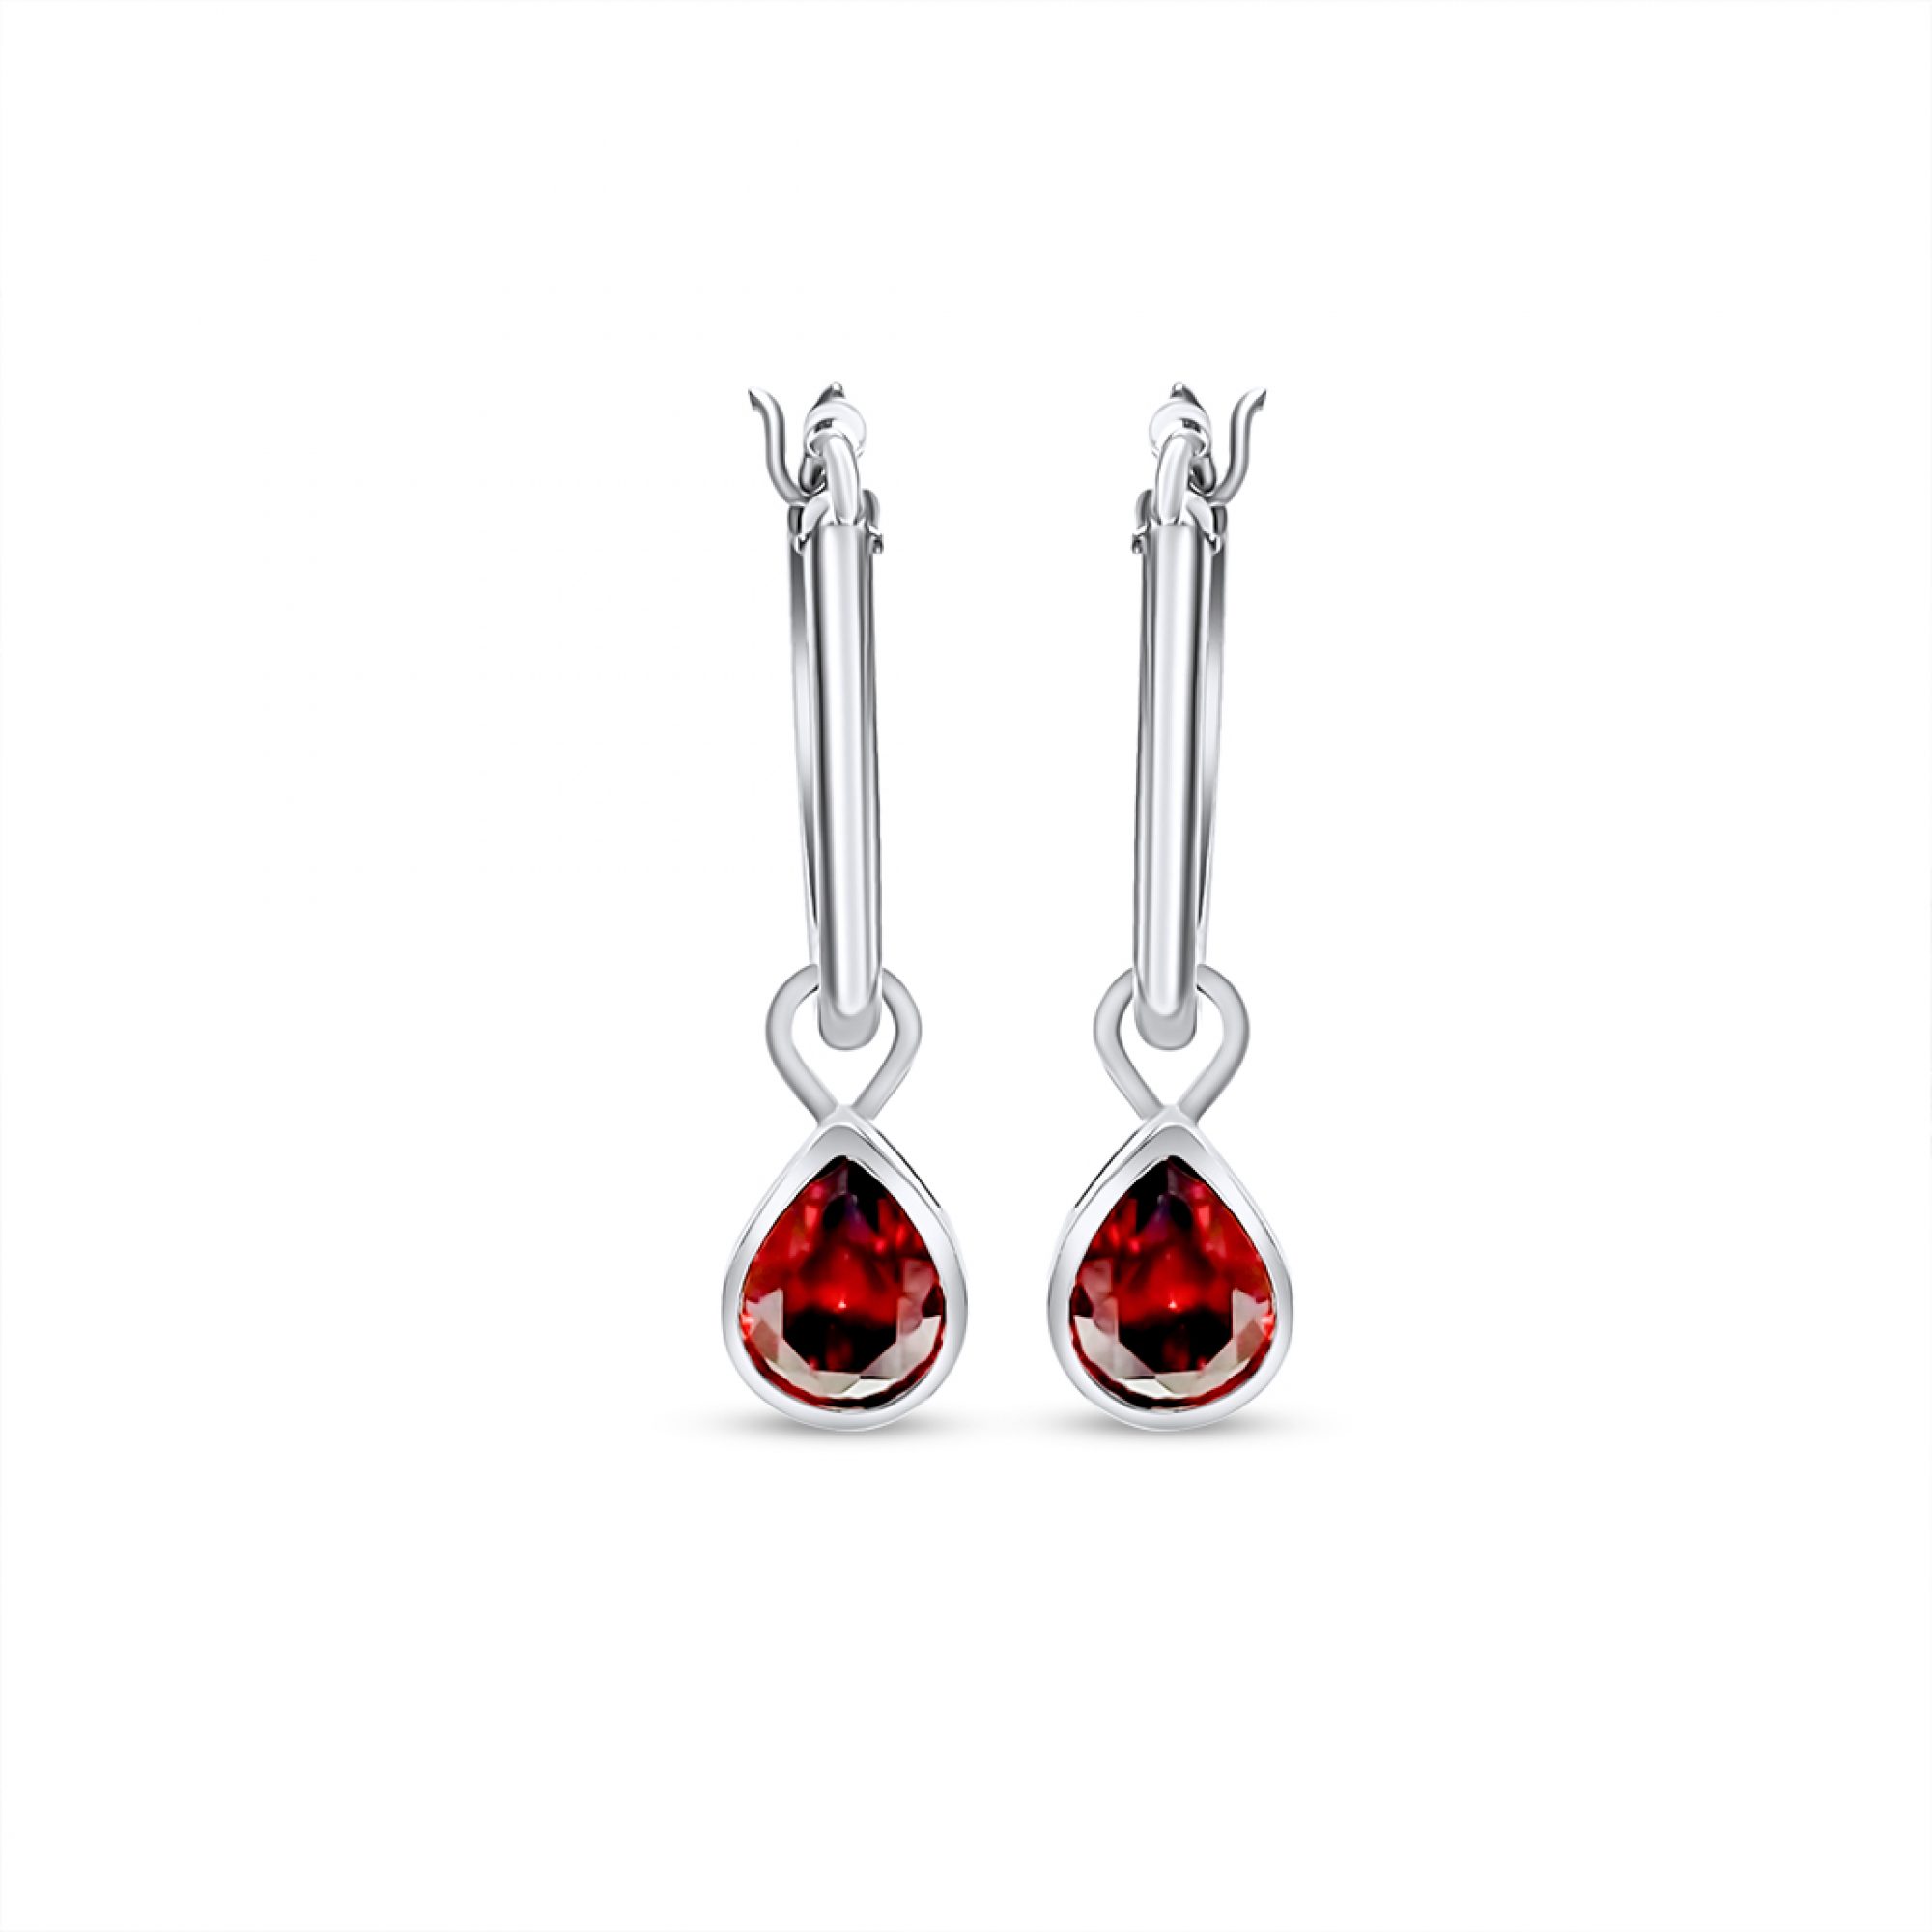 Silver earrings with ruby stone